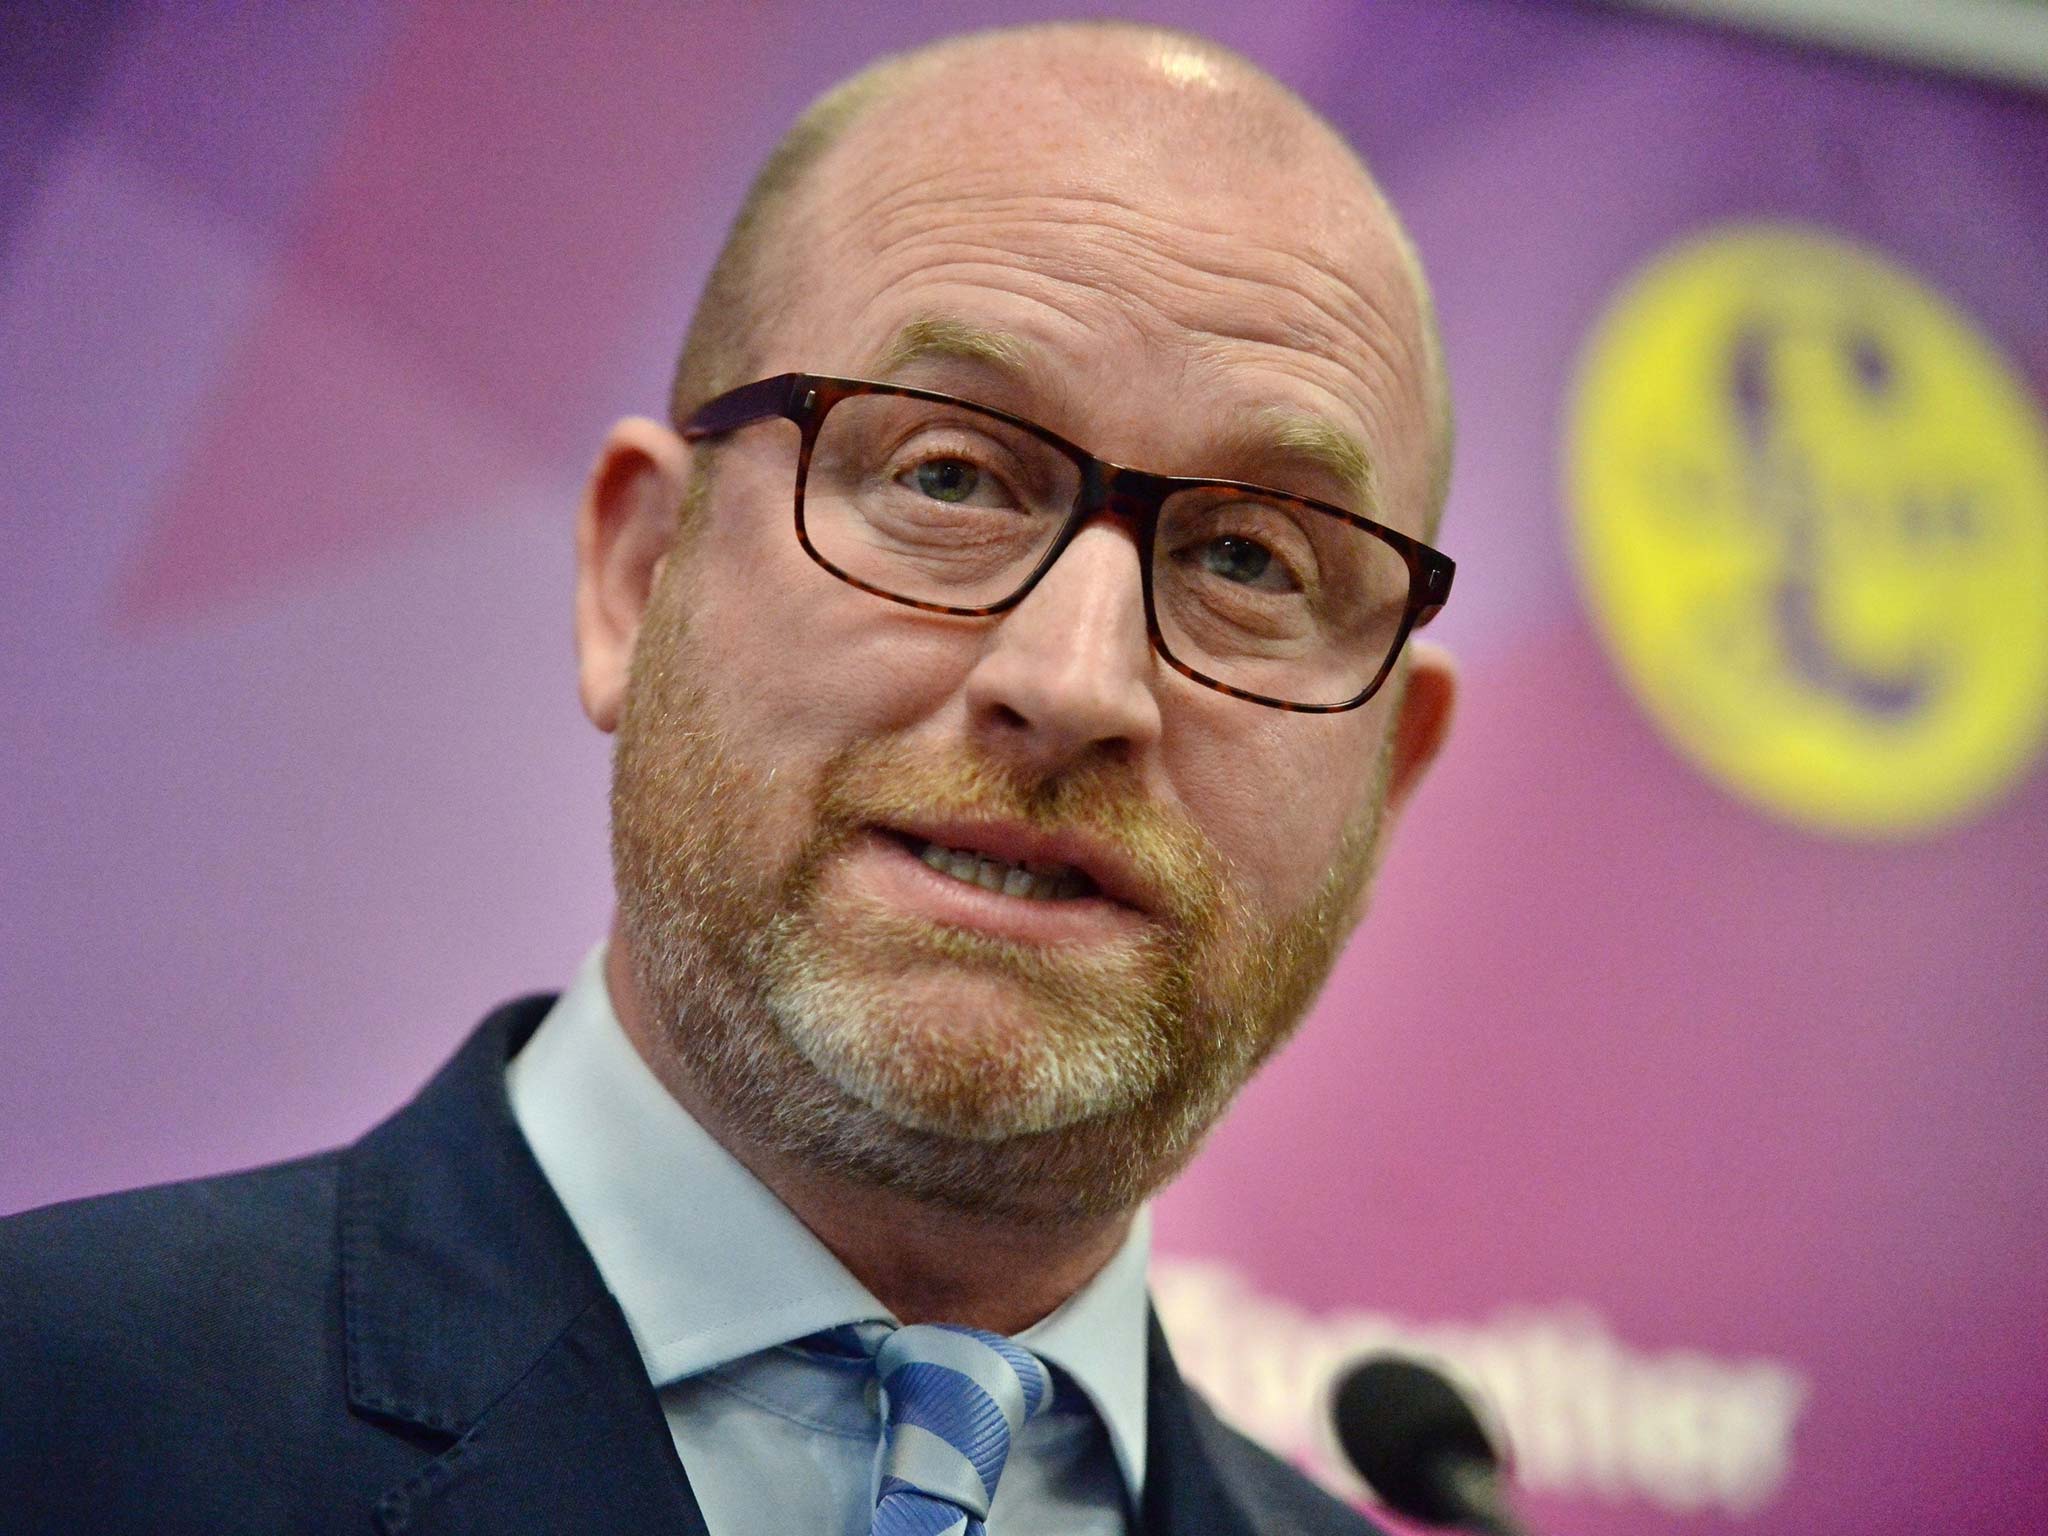 Ukip leader Paul Nuttall could be in for a dismal morning